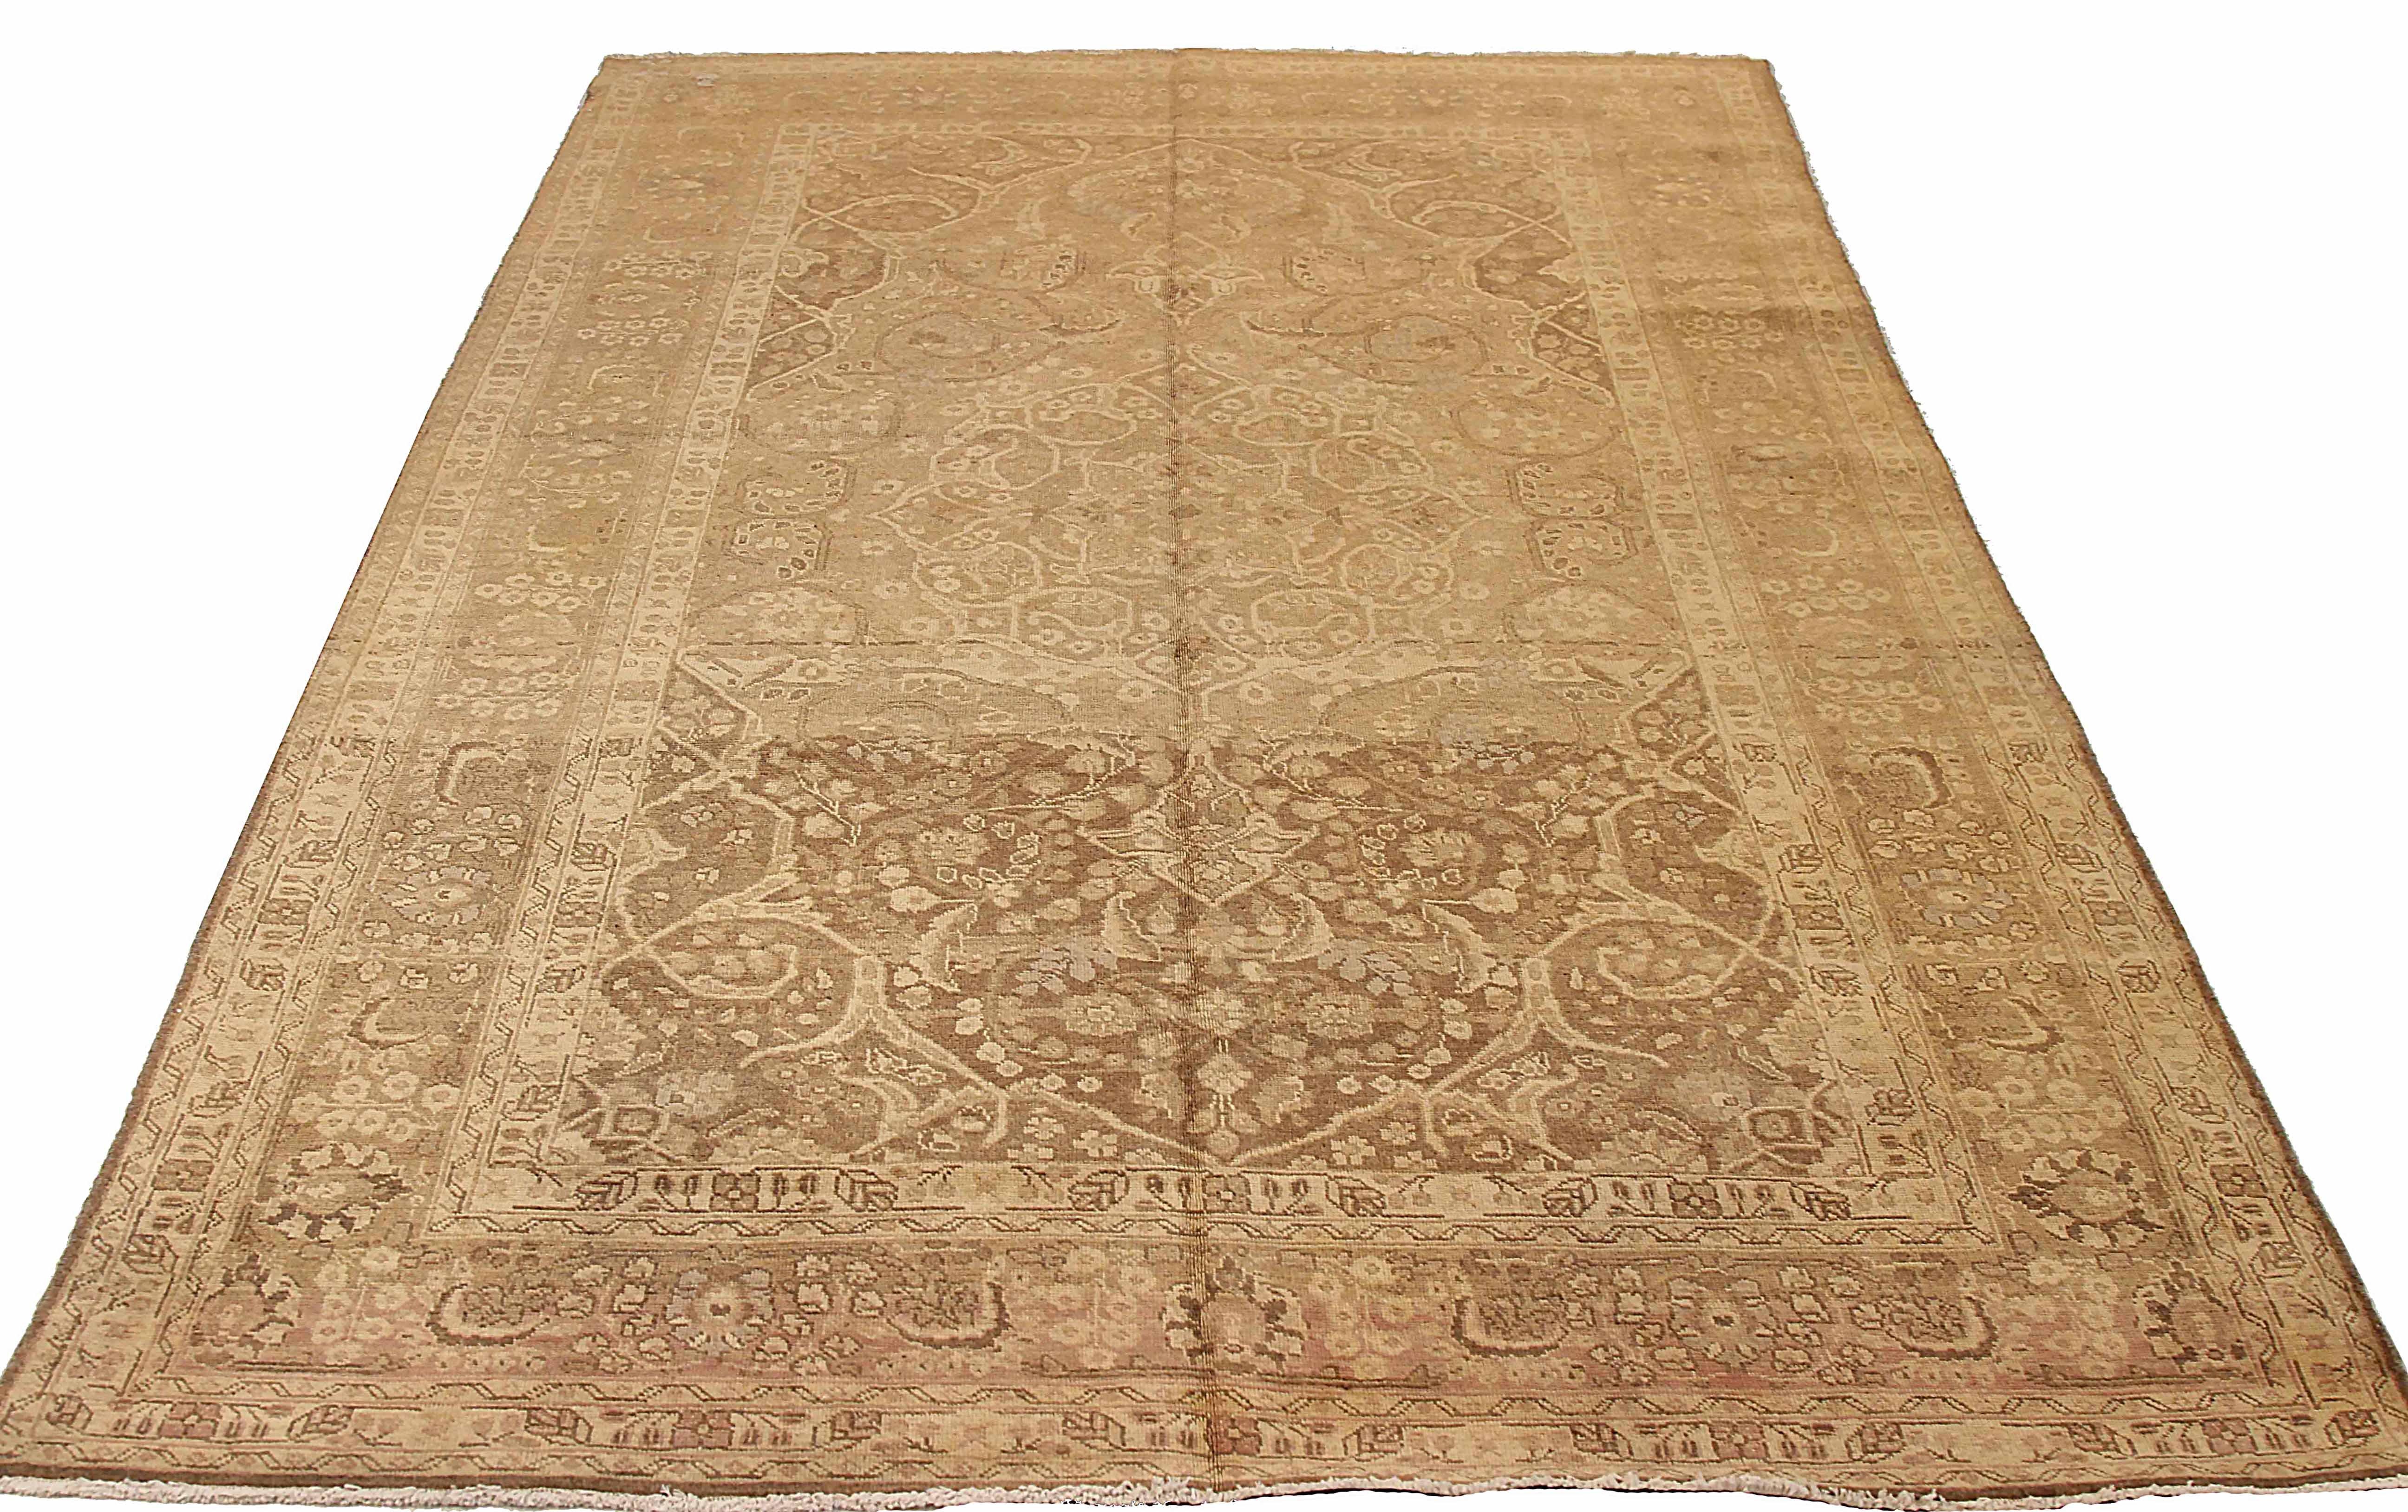 Antique Persian area rug handwoven from the finest sheep’s wool. It’s colored with all-natural vegetable dyes that are safe for humans and pets. It’s a traditional Tabriz design handwoven by expert artisans.It’s a lovely area rug that can be